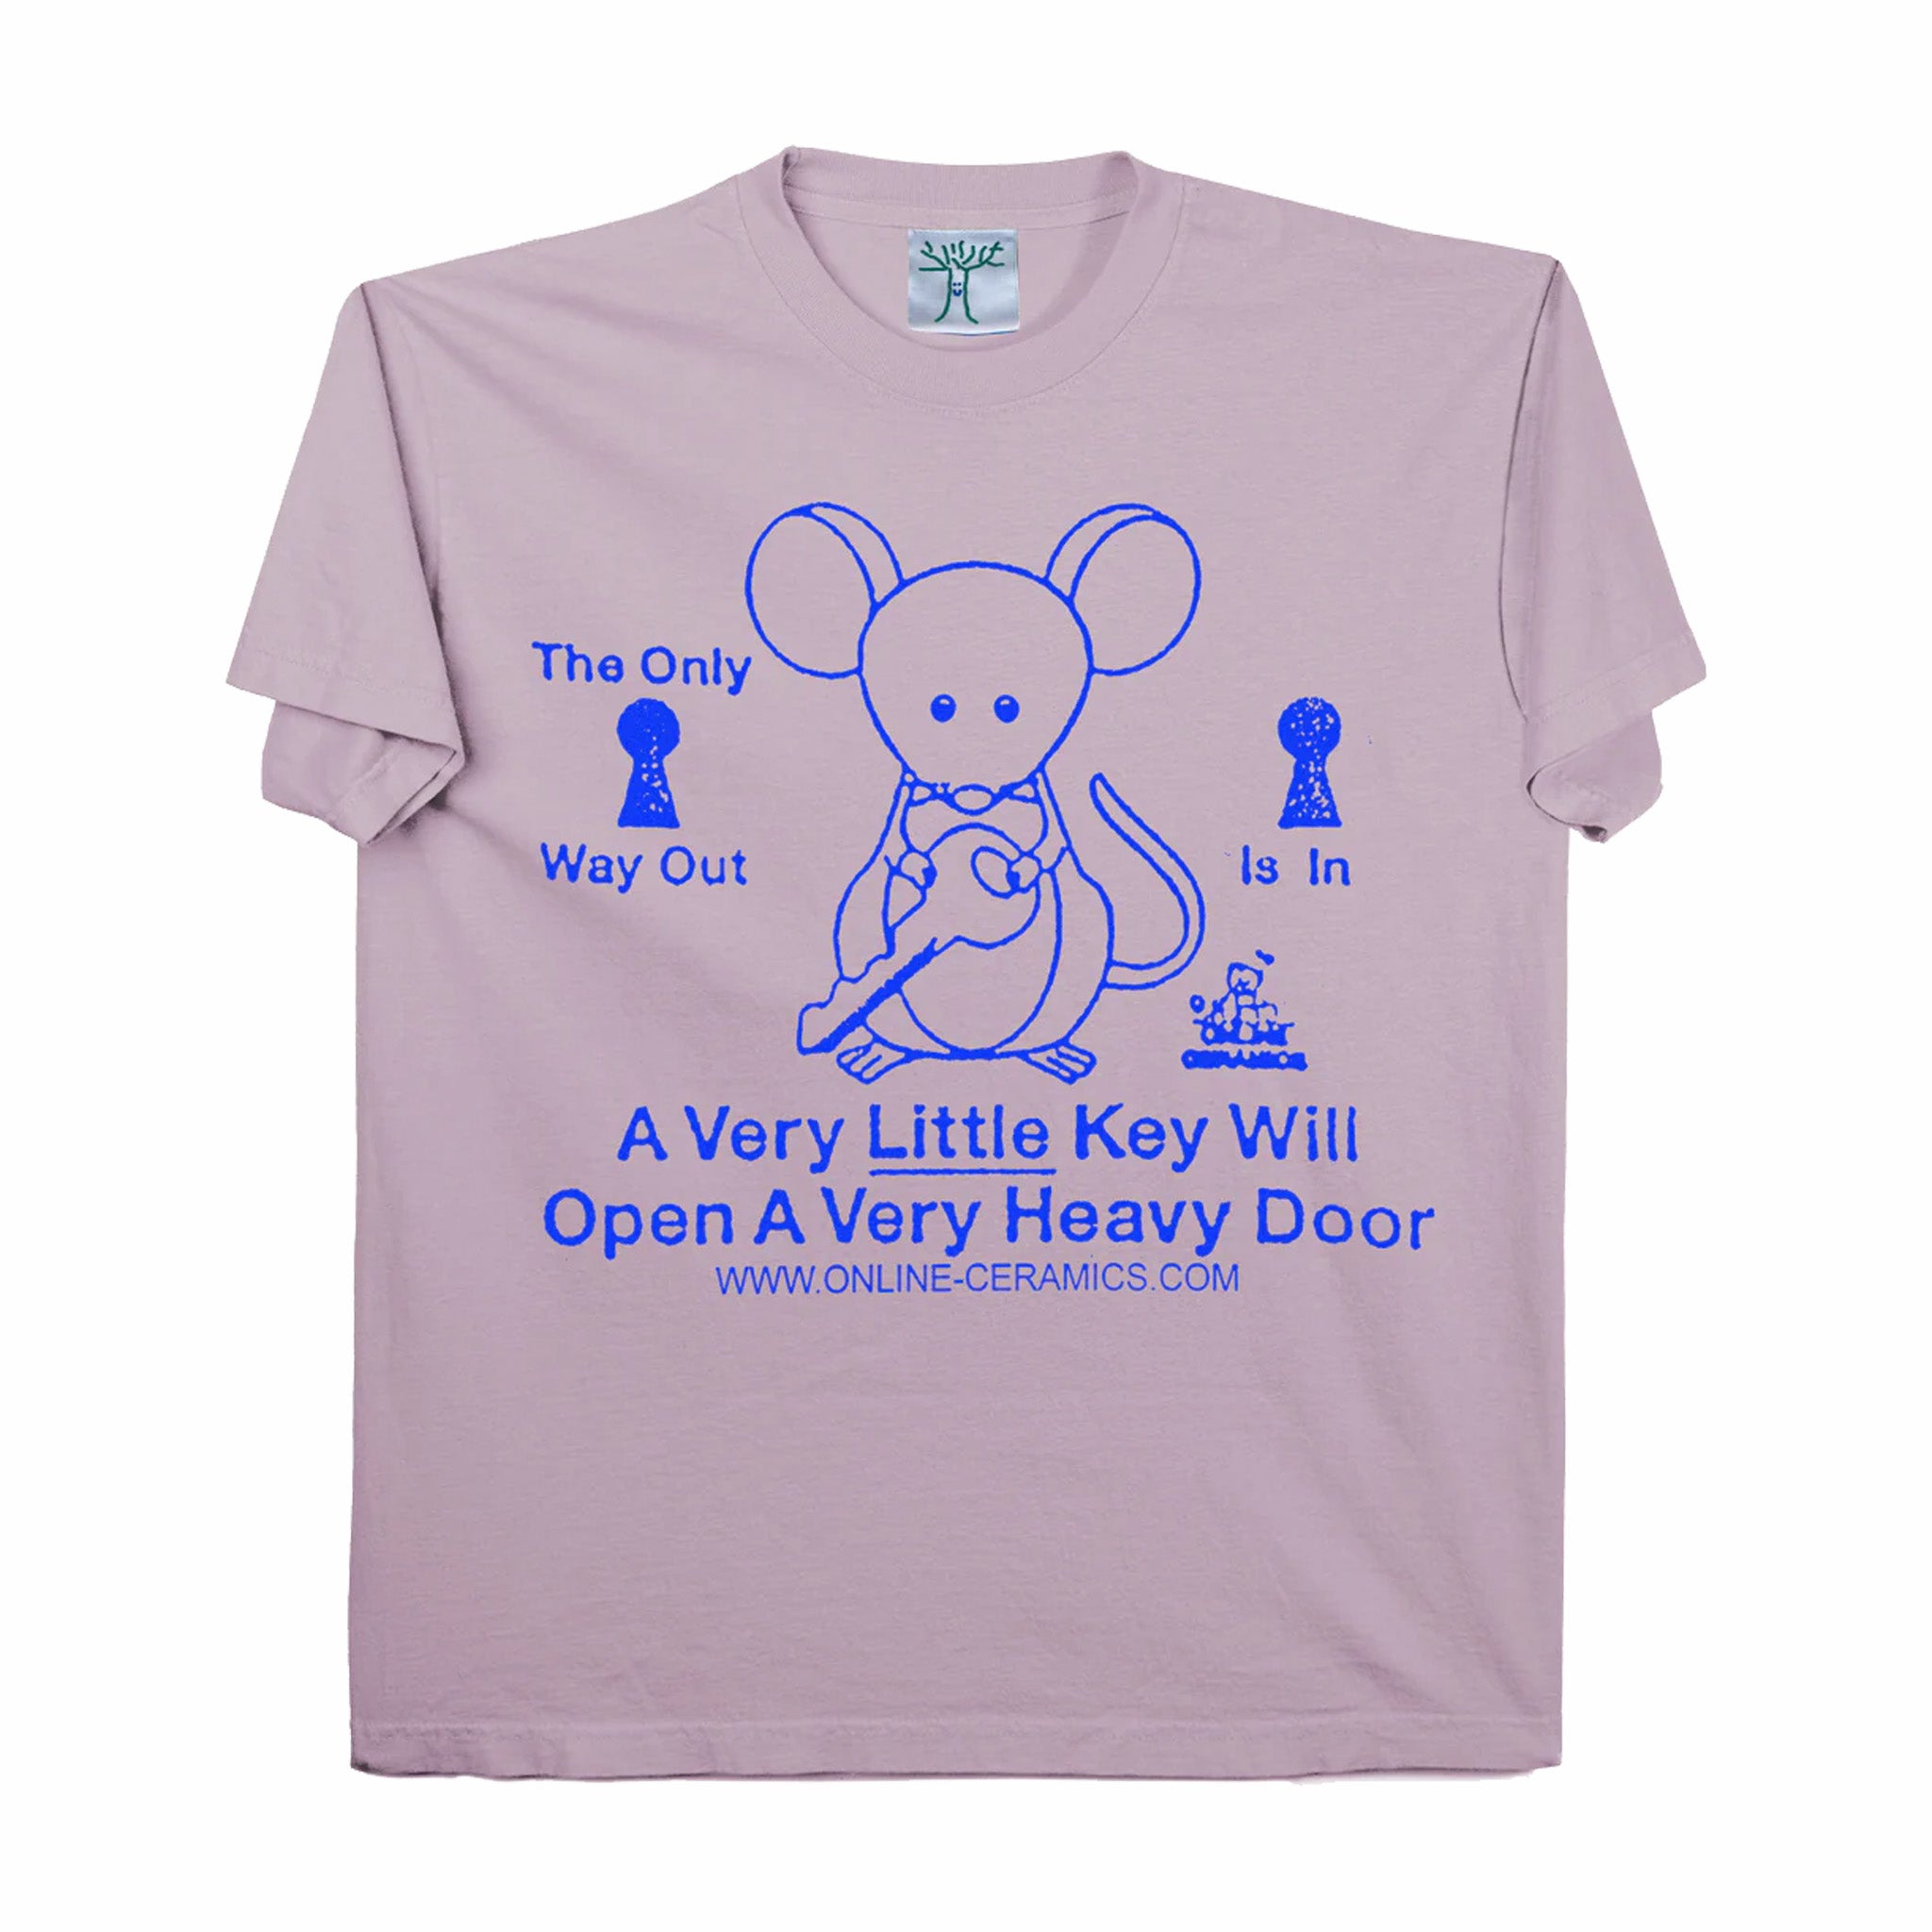 Online Ceramics The Only Way Out Is In Tee (Purple) - August Shop